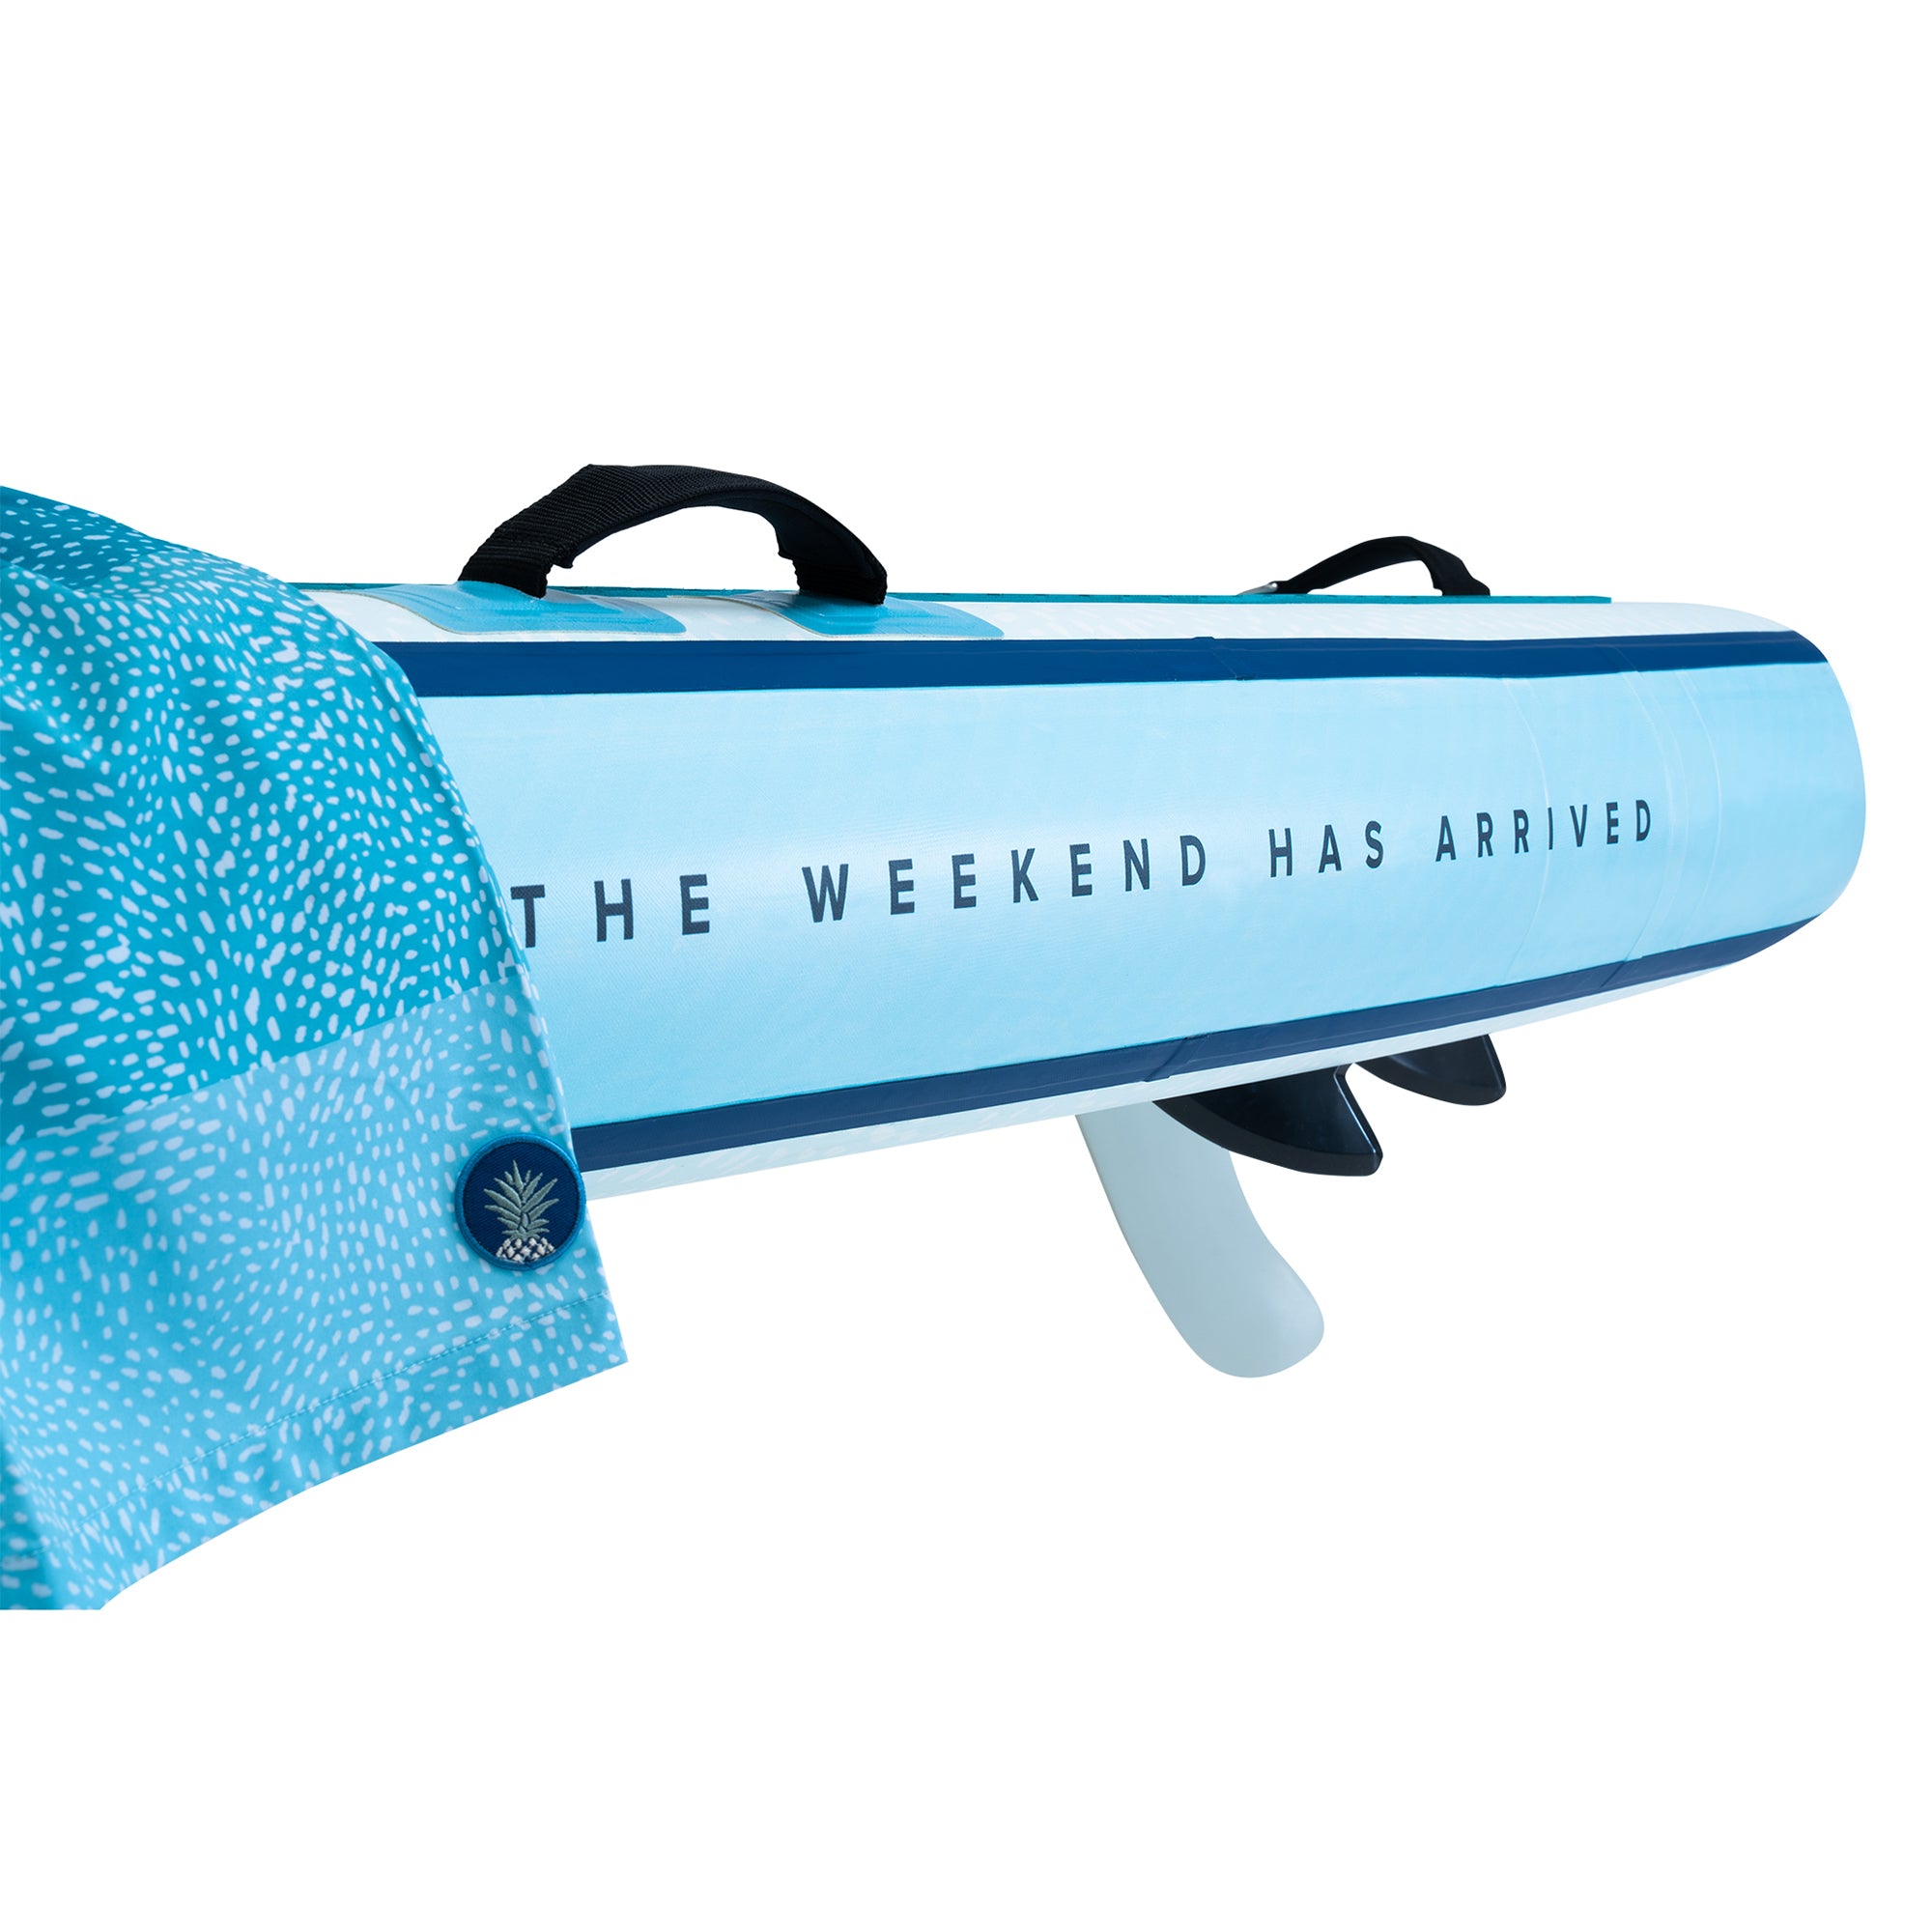 Chubbies Whale Shark Megalodon Limited Edition Inflatable Paddle Board The Weekend Has Arrived Close Up